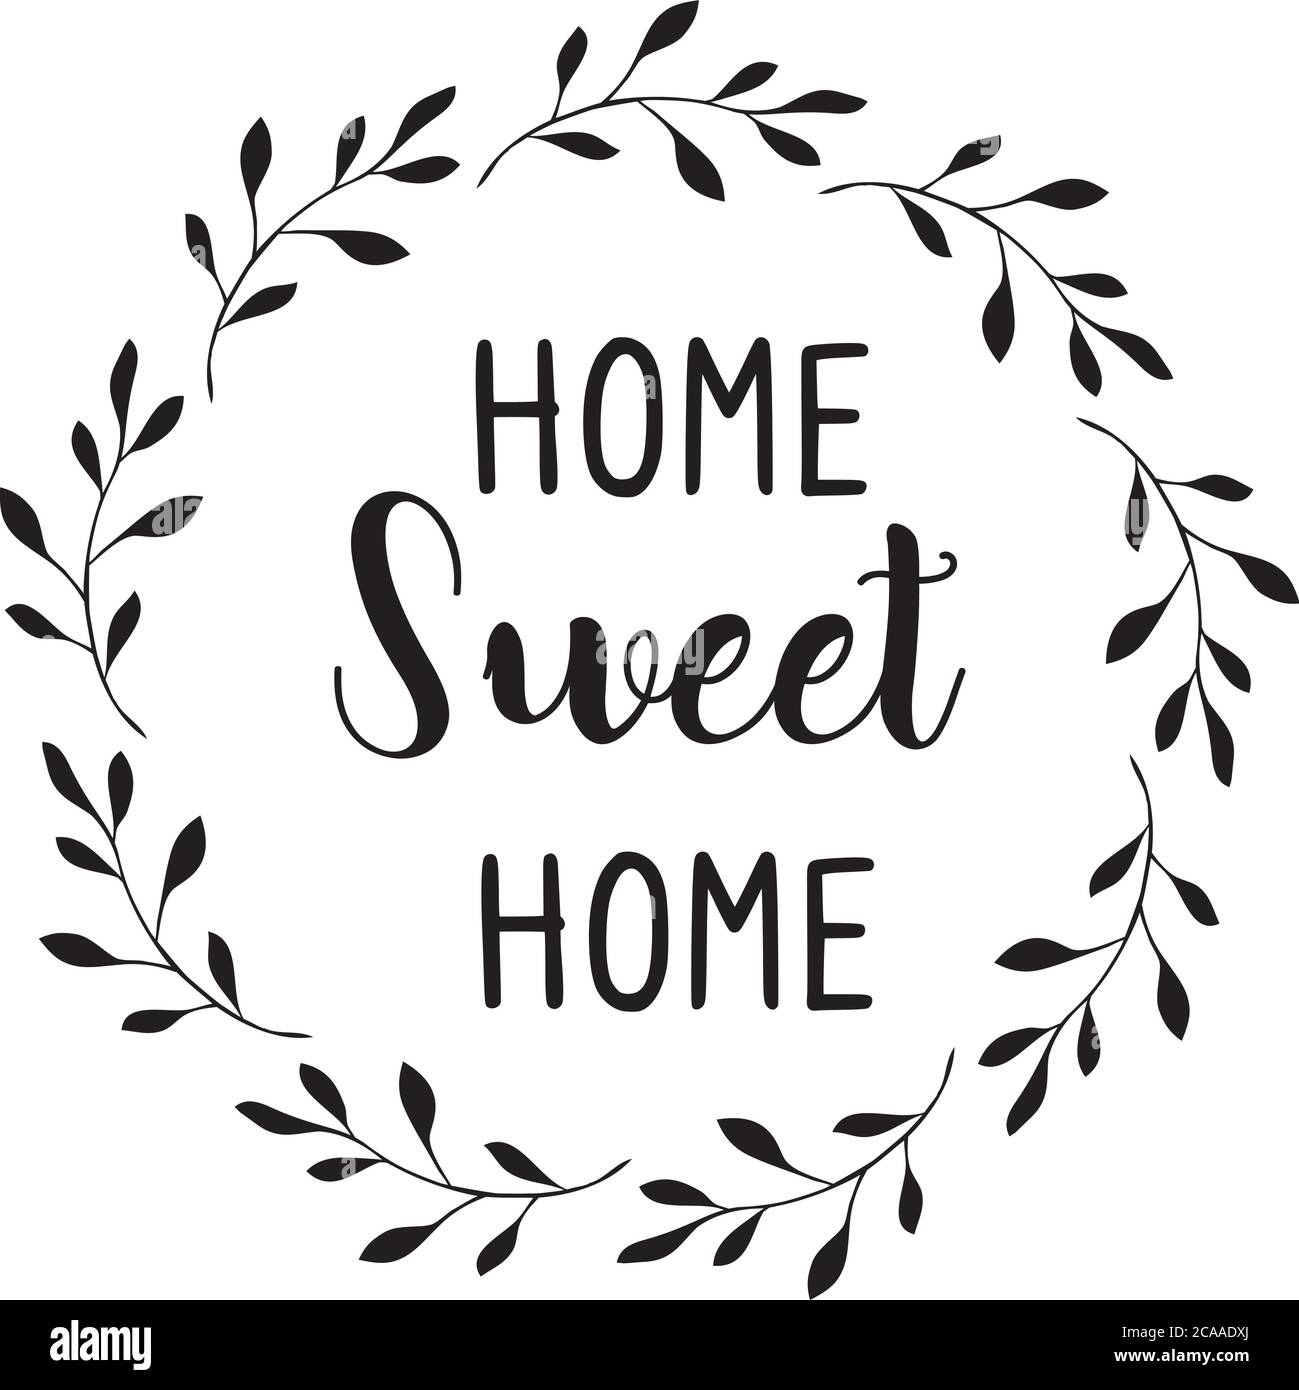 vector illustration of home sweet home. handwriting background. Stock Vector